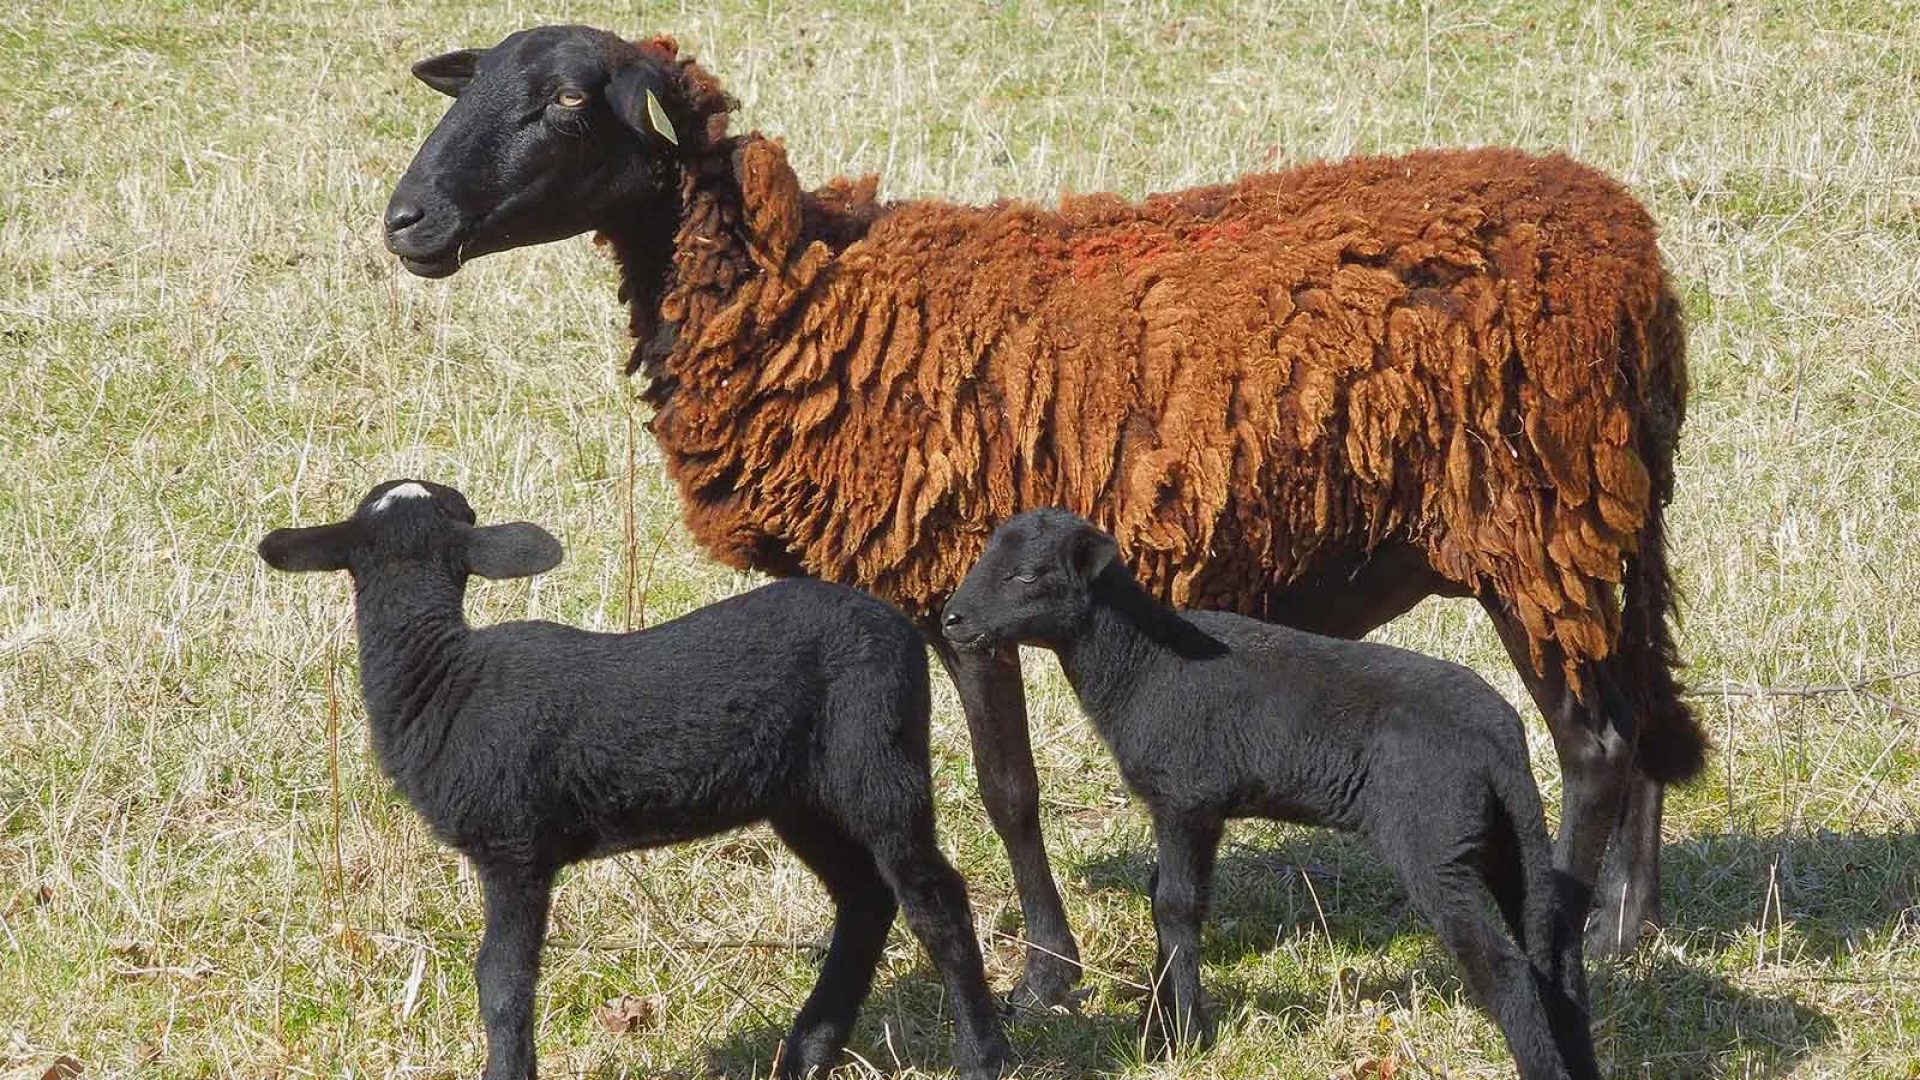 Black lambs from Velay, Haute-Loire in Auvergne